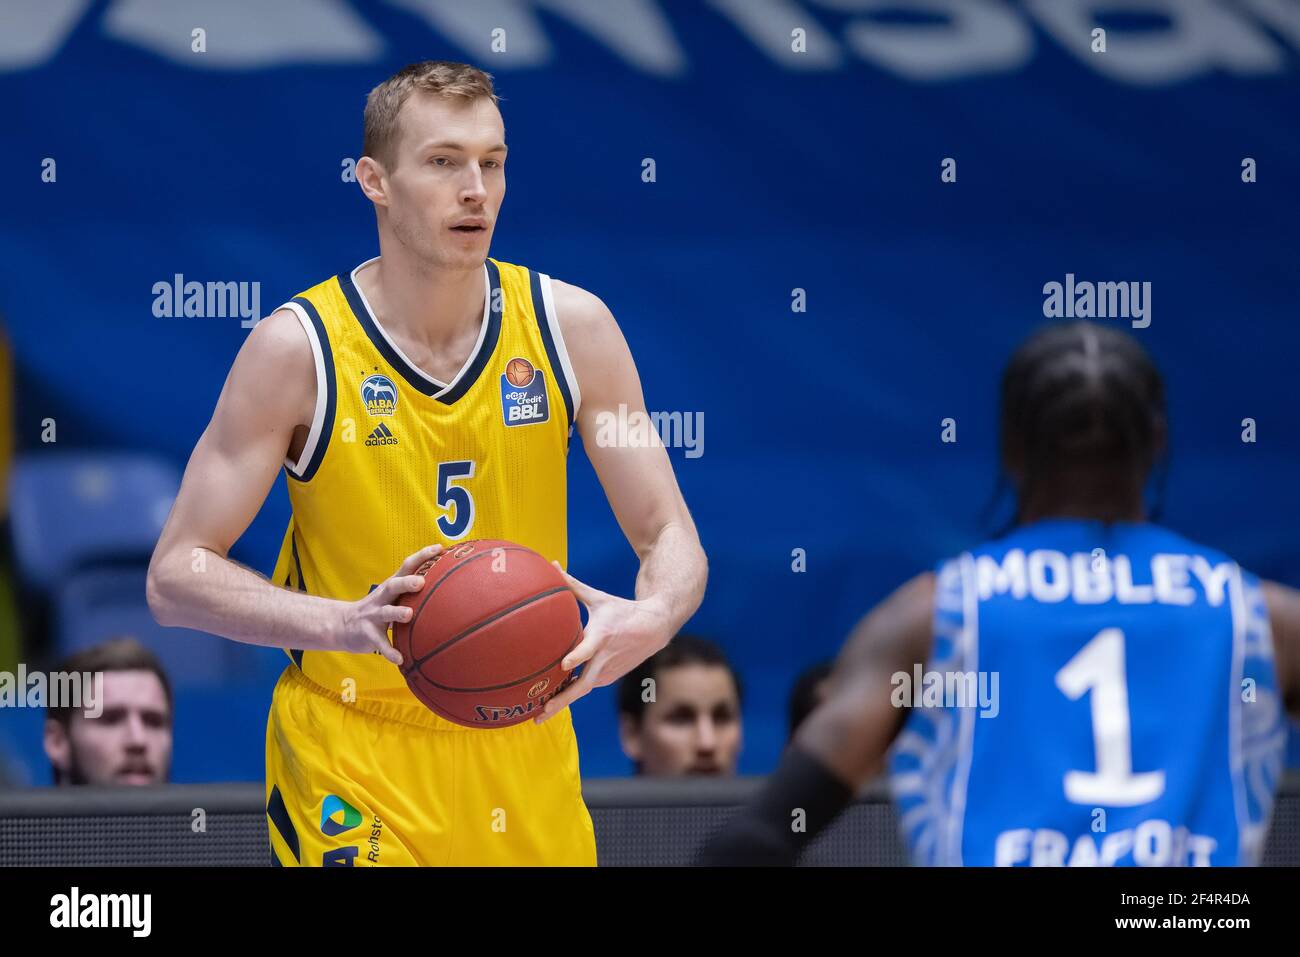 21 March 2021, Hessen, Frankfurt/Main: Niels Giffey (Alba Berlin, 5).  Basketball game of the easyCredit BBL between the Fraport Skyliners and  Alba Berlin on 21 March 2021 at the Fraport Arena in